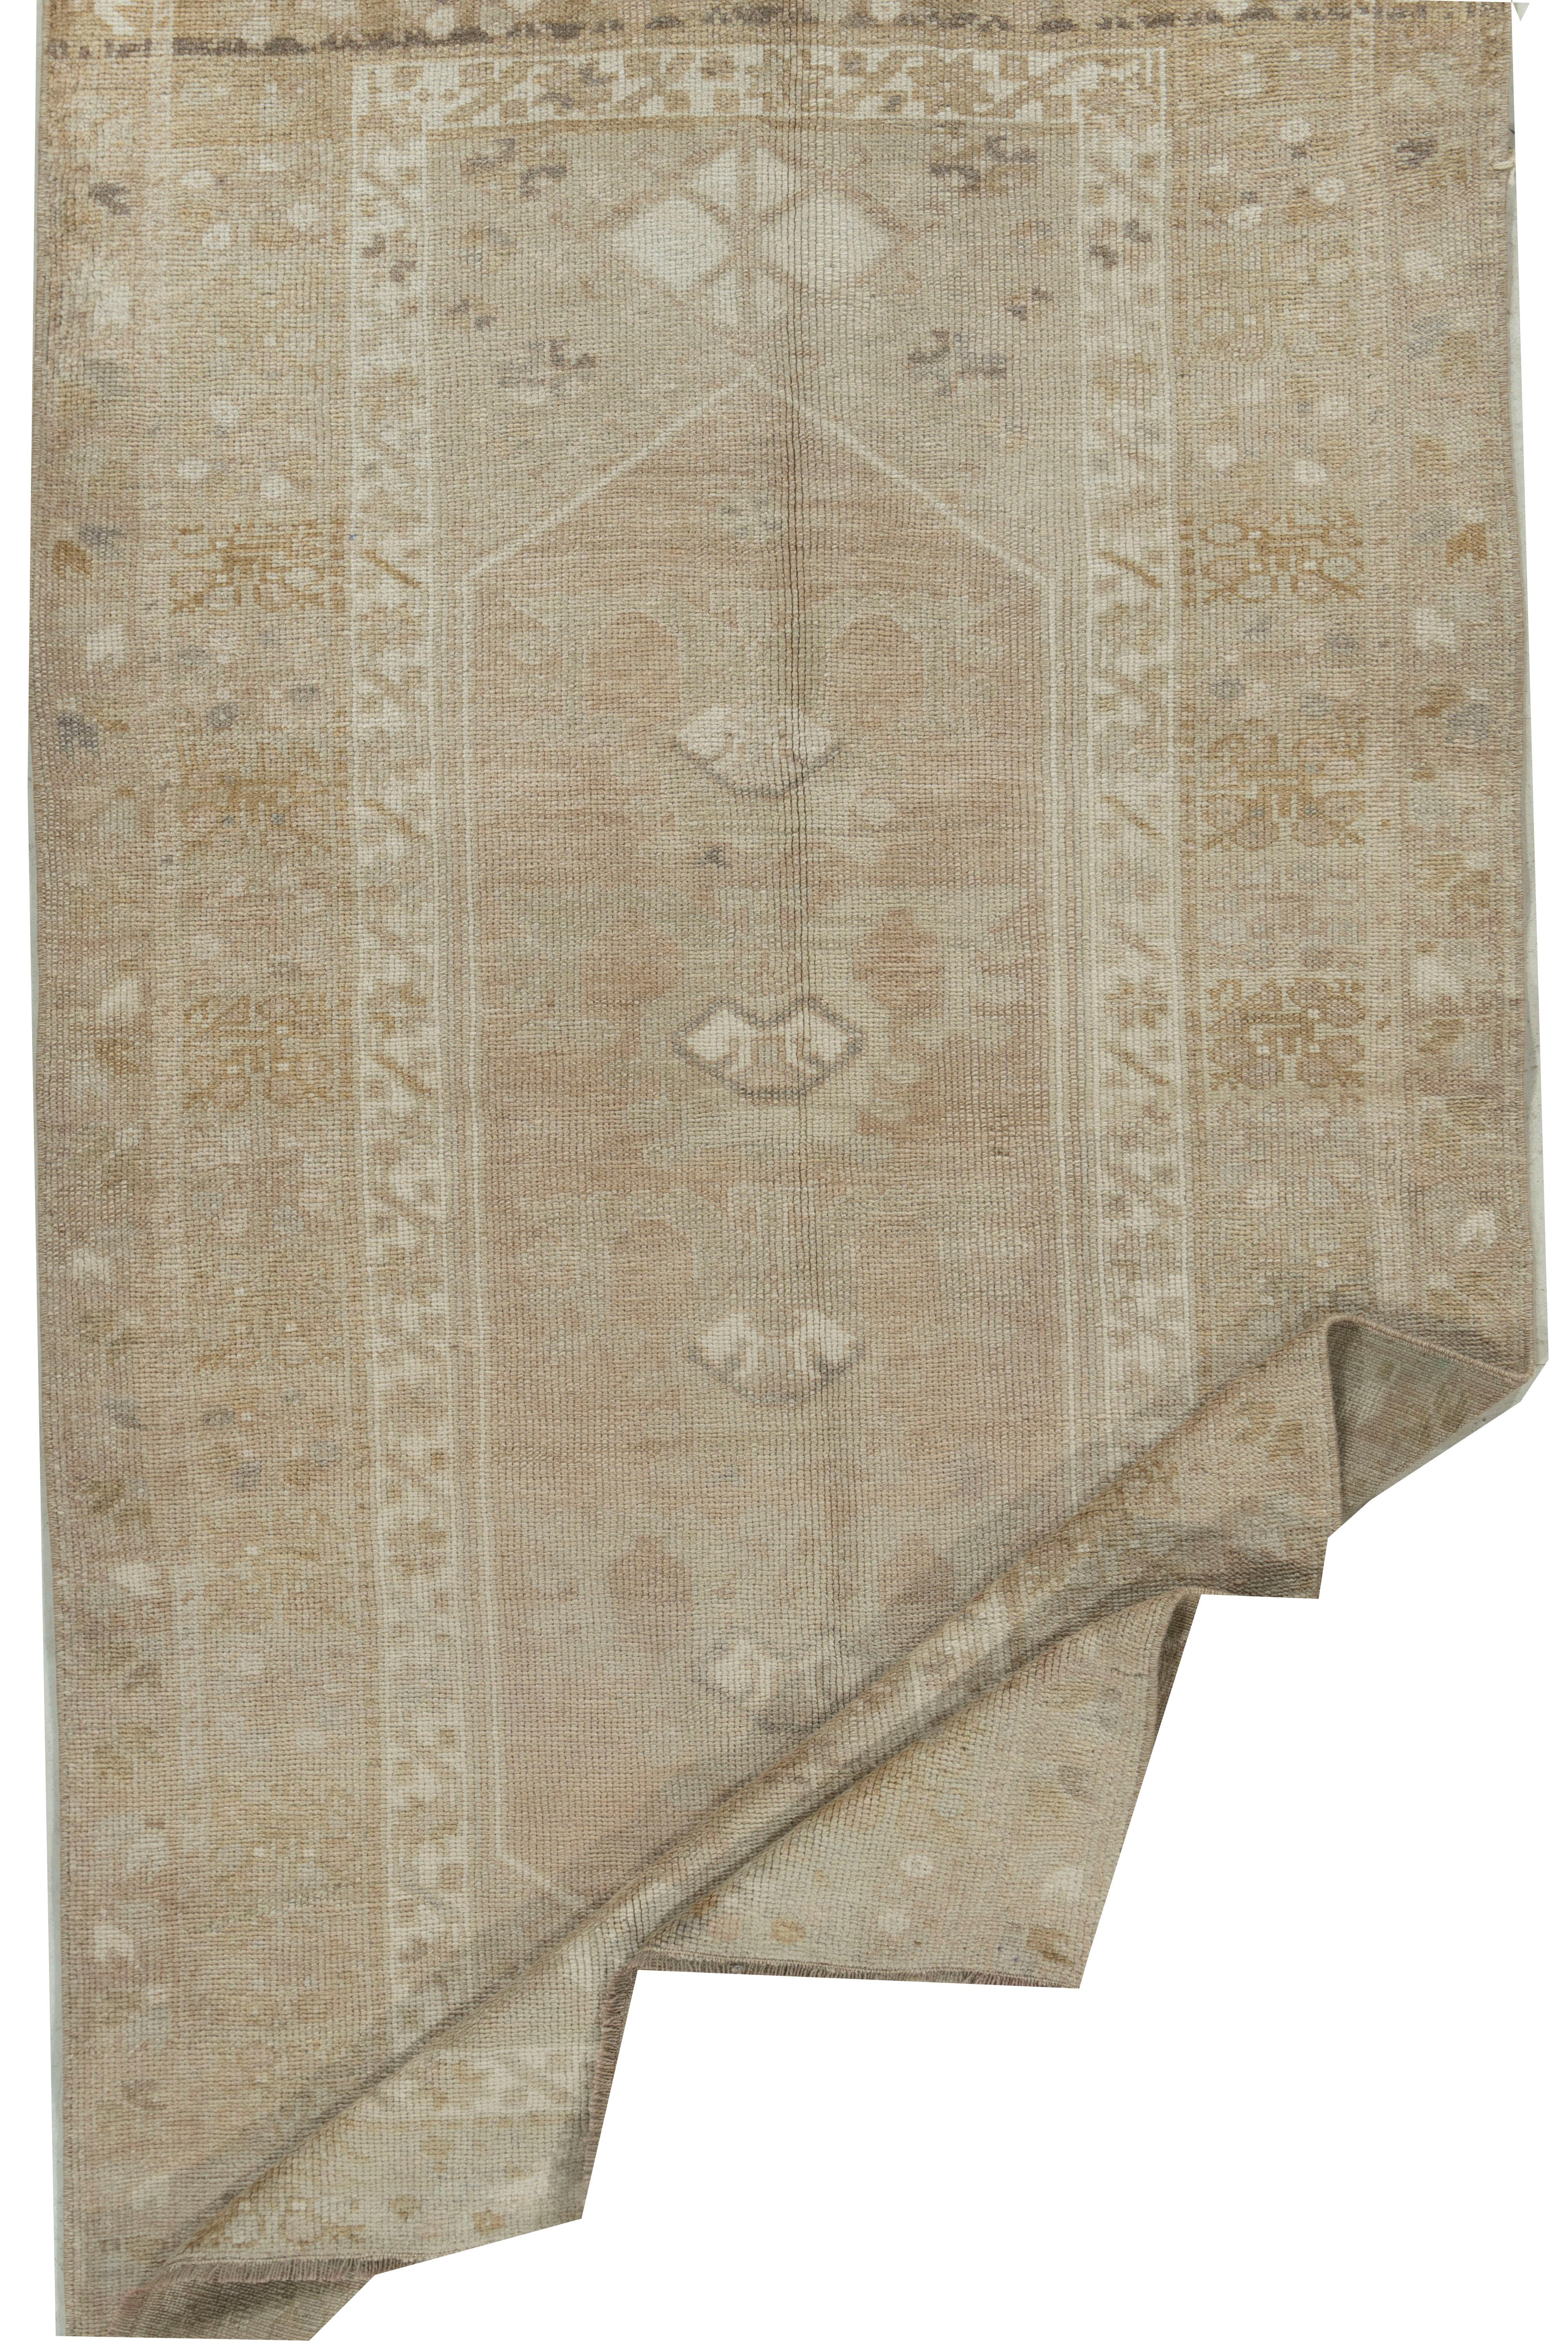 Vintage Turkish Oushak Area Rug 3'3 X 5'1. Even today, Oushak rugs are still the first choice of professional interior designers. Sometimes this is because when grading Oushak carpets, carpet connoisseurs will not only look at the overall quality of